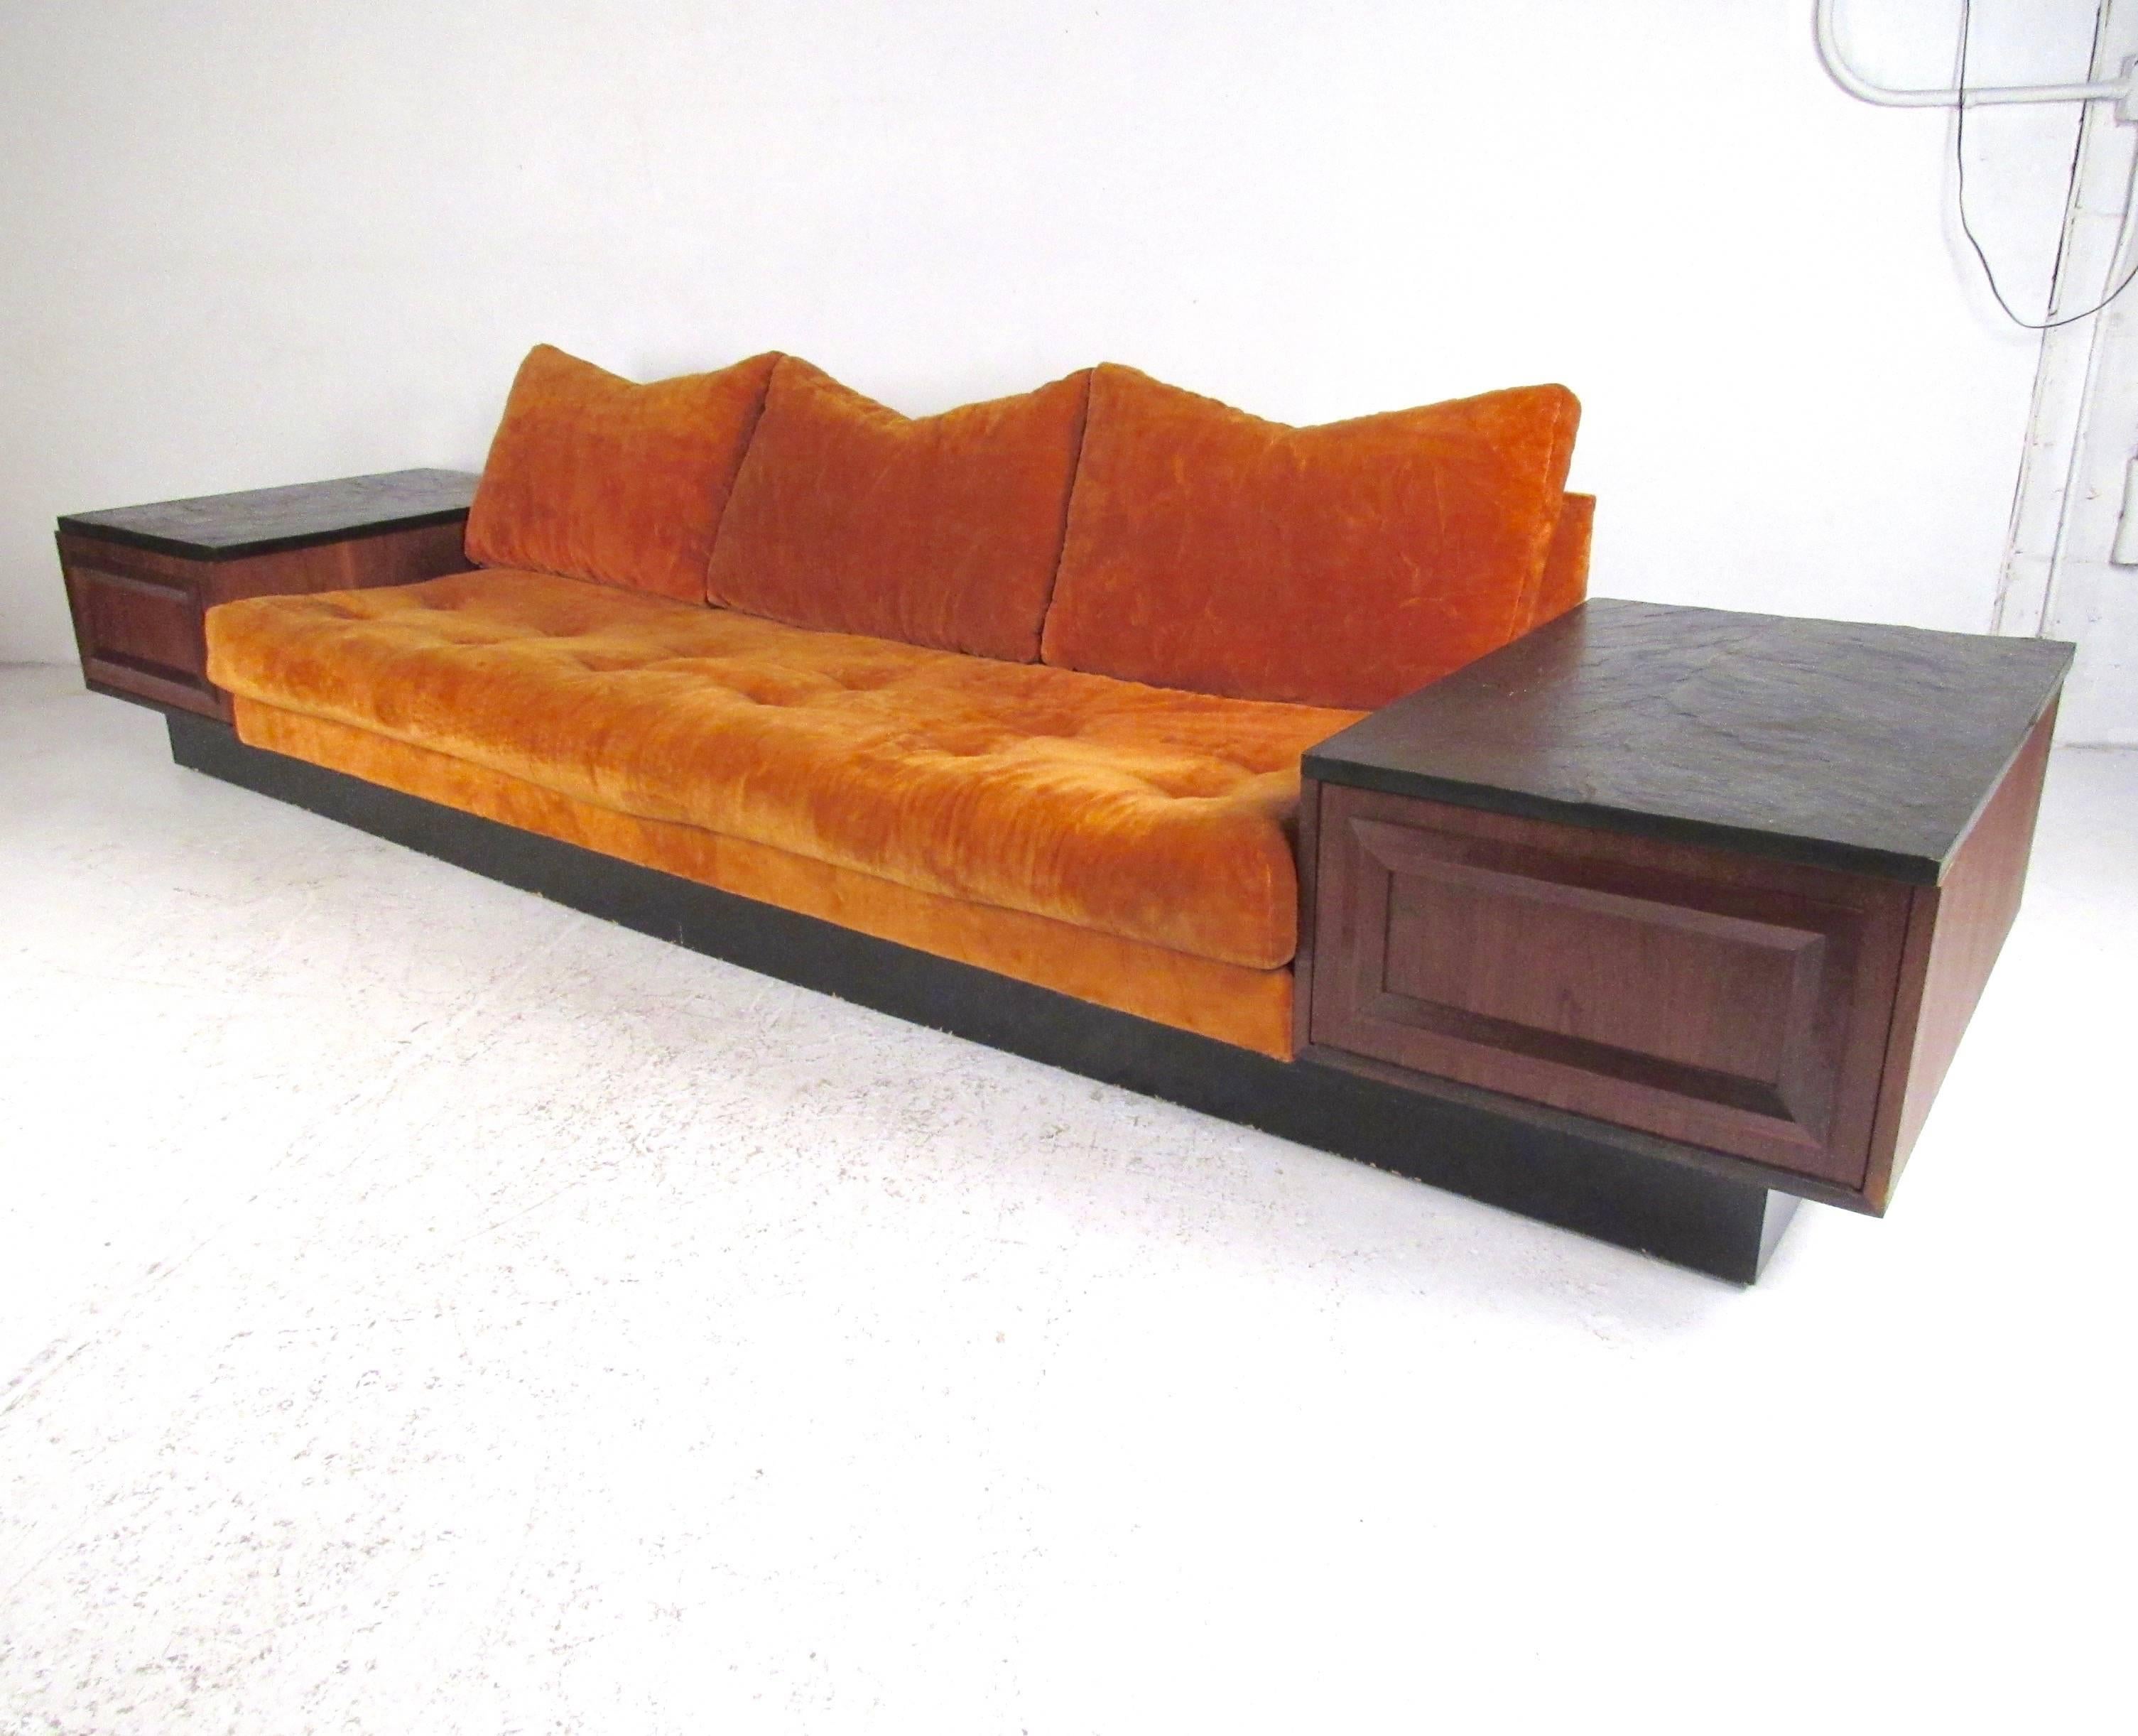 This exquisite oversized sofa features vintage fabric and offers built in walnut end tables, complete with slate stone tops. Tufted upholstery in vibrant orange make this Adrian Pearsall style sofa a substantial, comfortable, and impressive addition